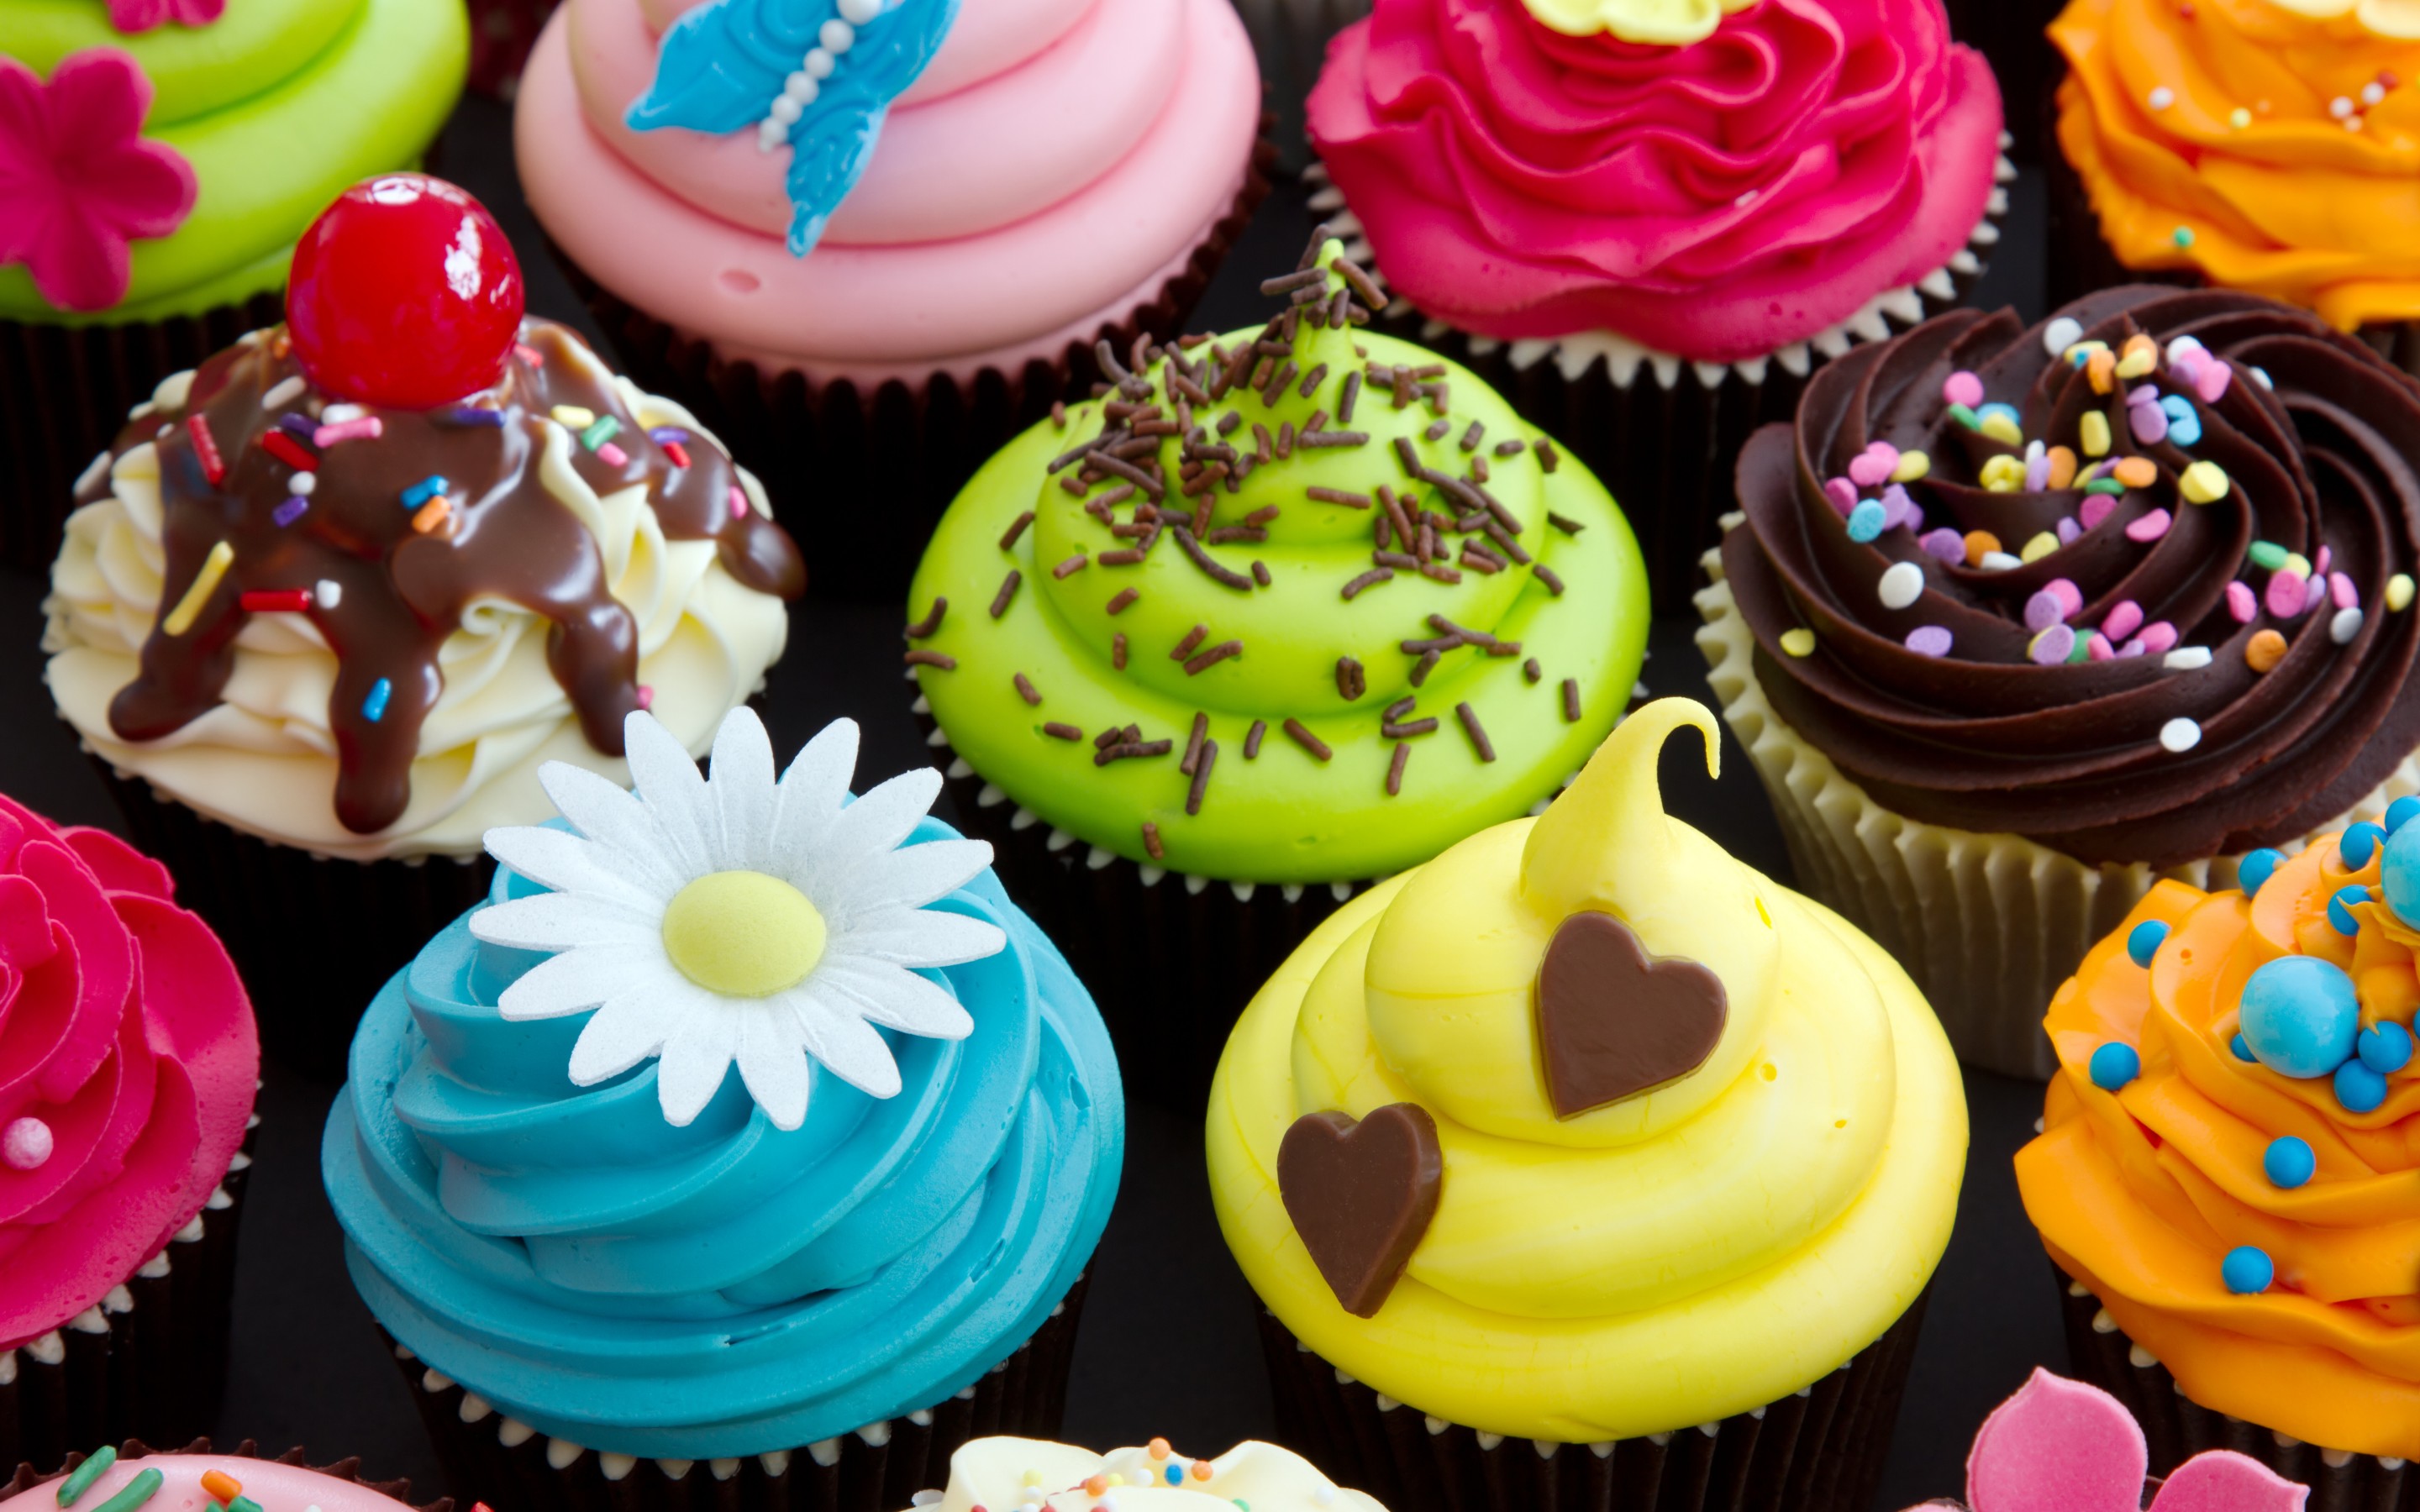 Gallery For gt Colorful Cupcake Wallpaper